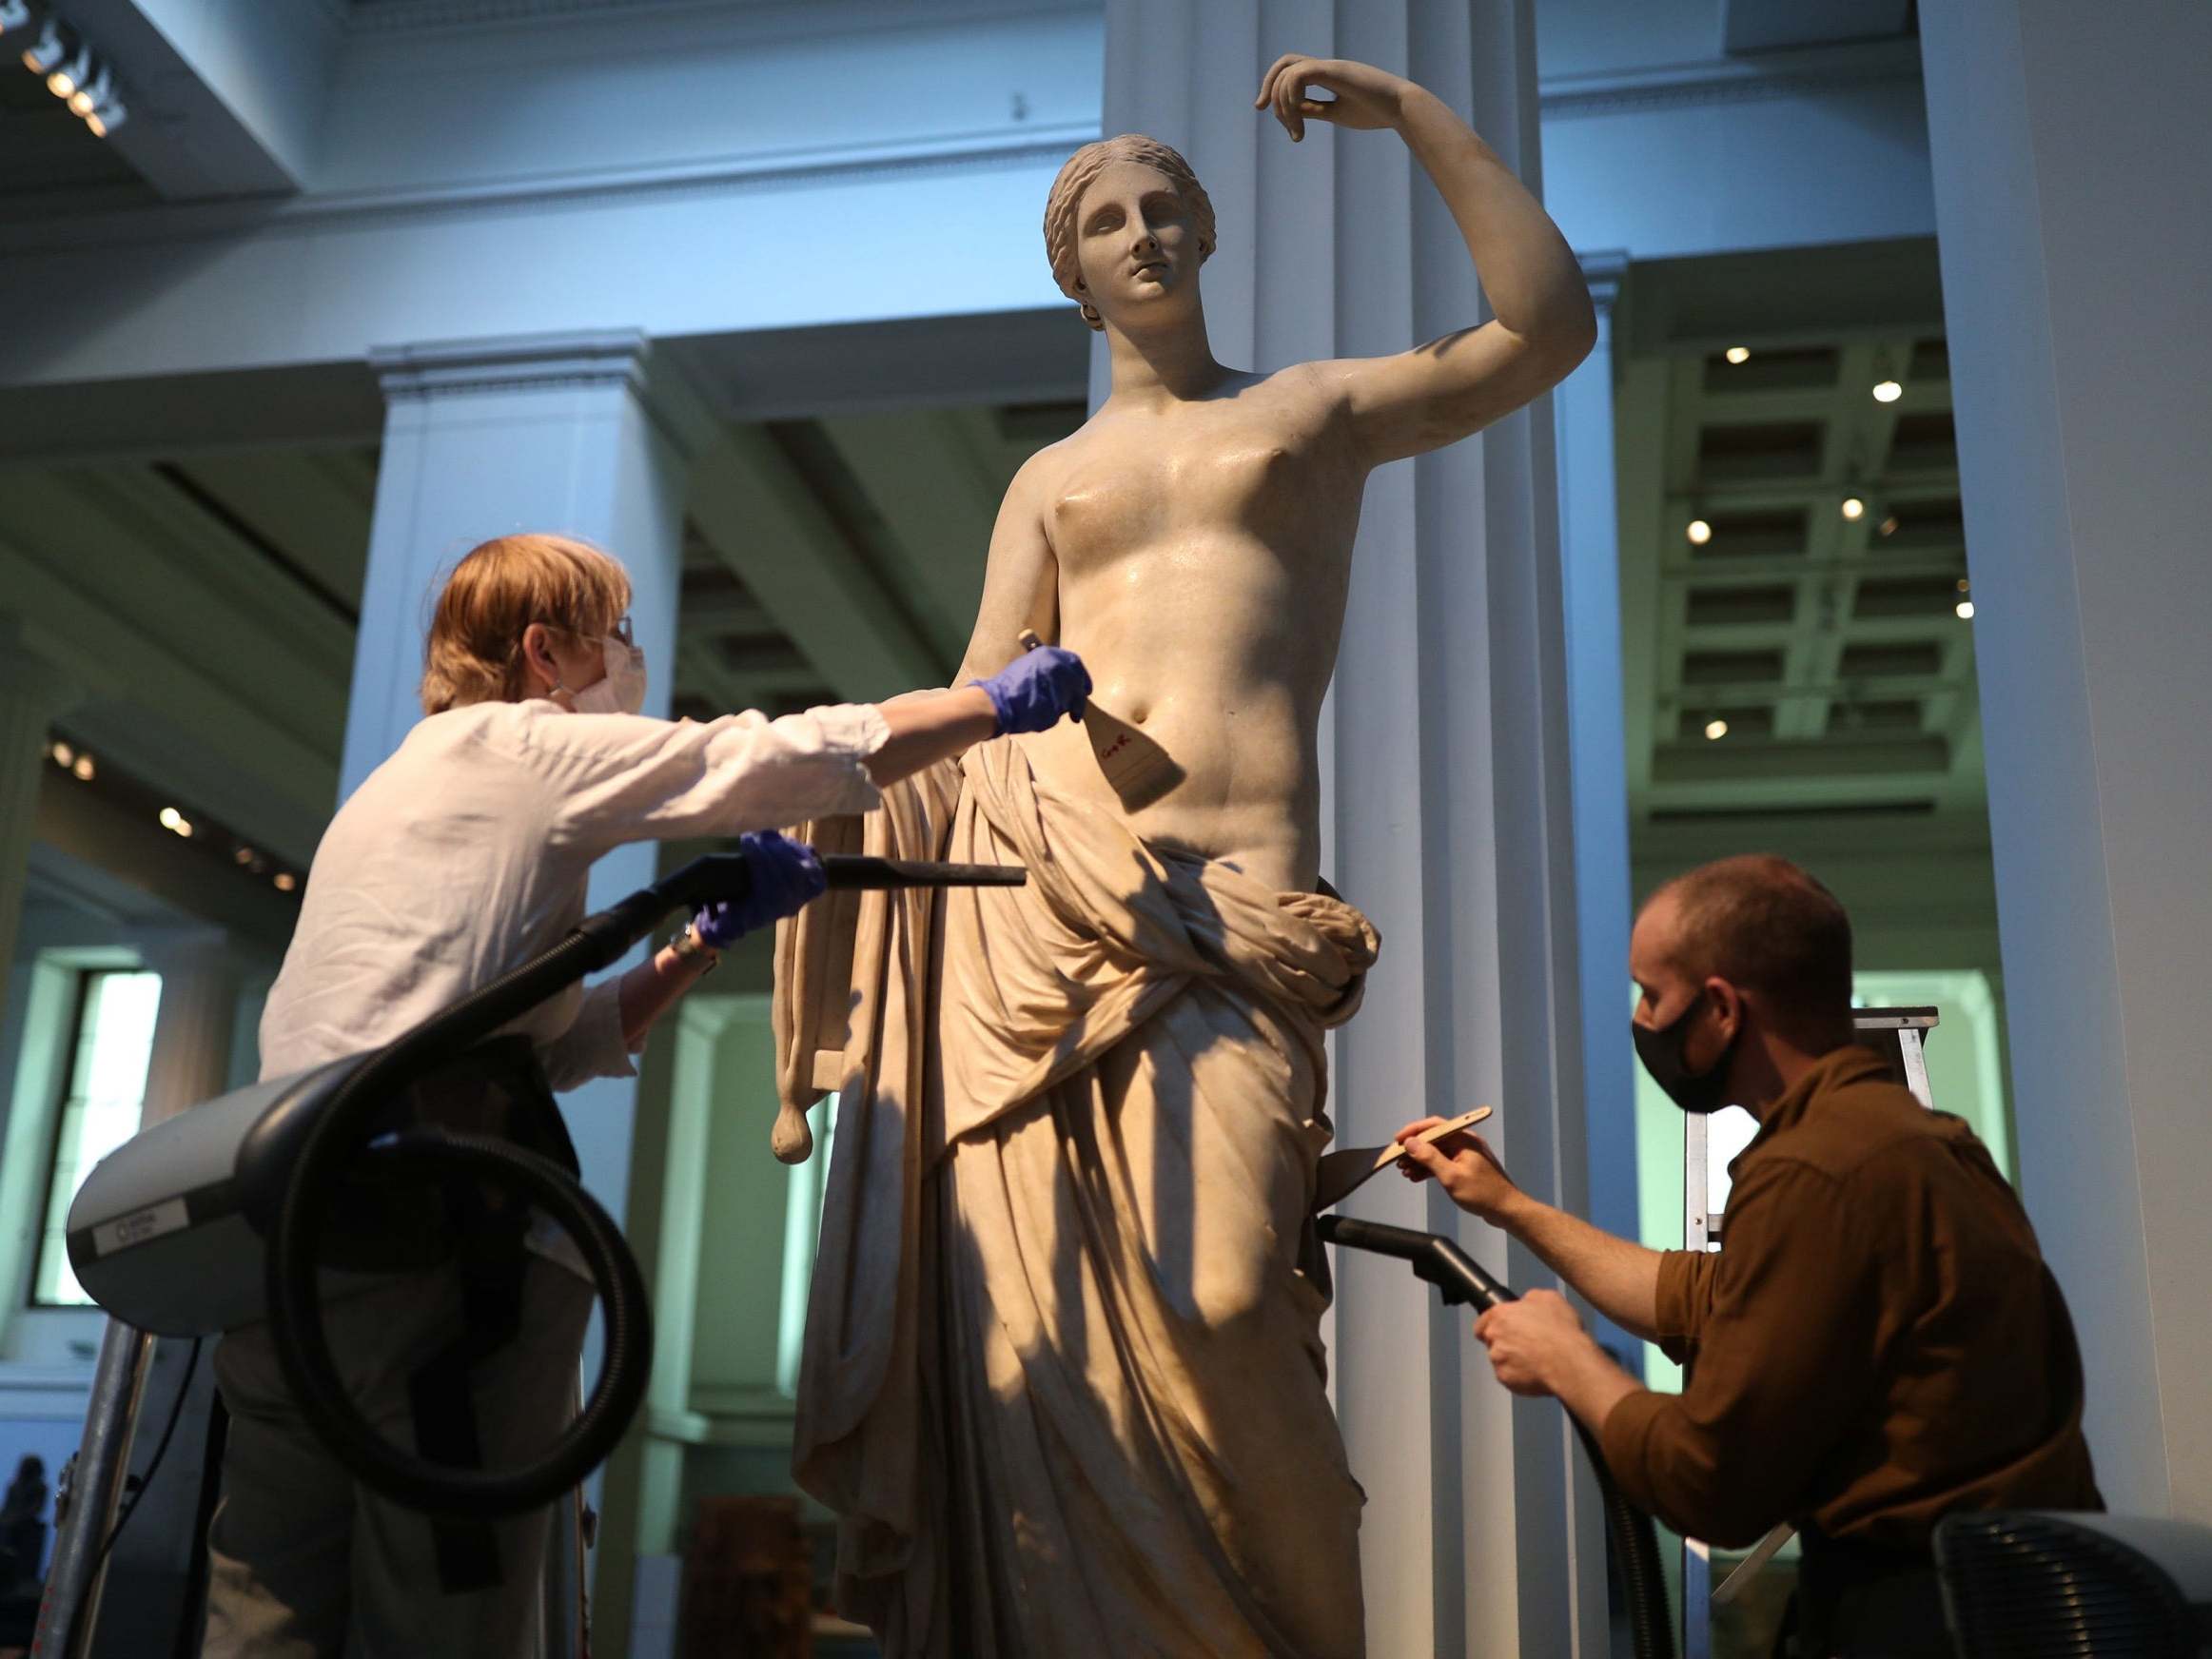 The collections team dust the Townley Venus Roman sculpture in the museum’s Greek and Roman sculpture gallery